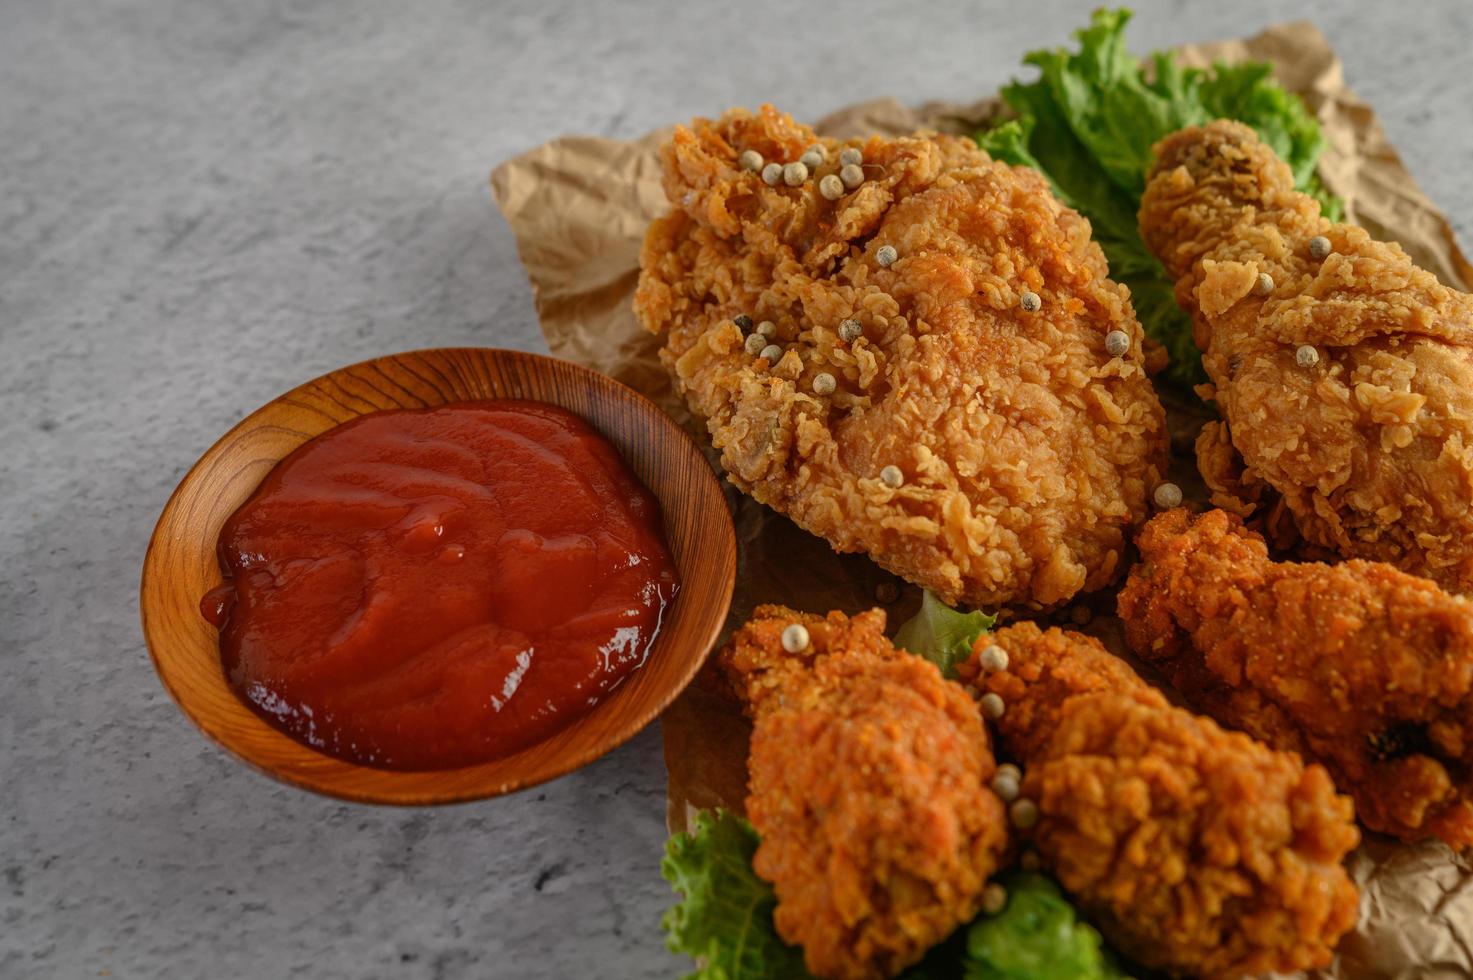 Crispy fried chicken with sauce photo